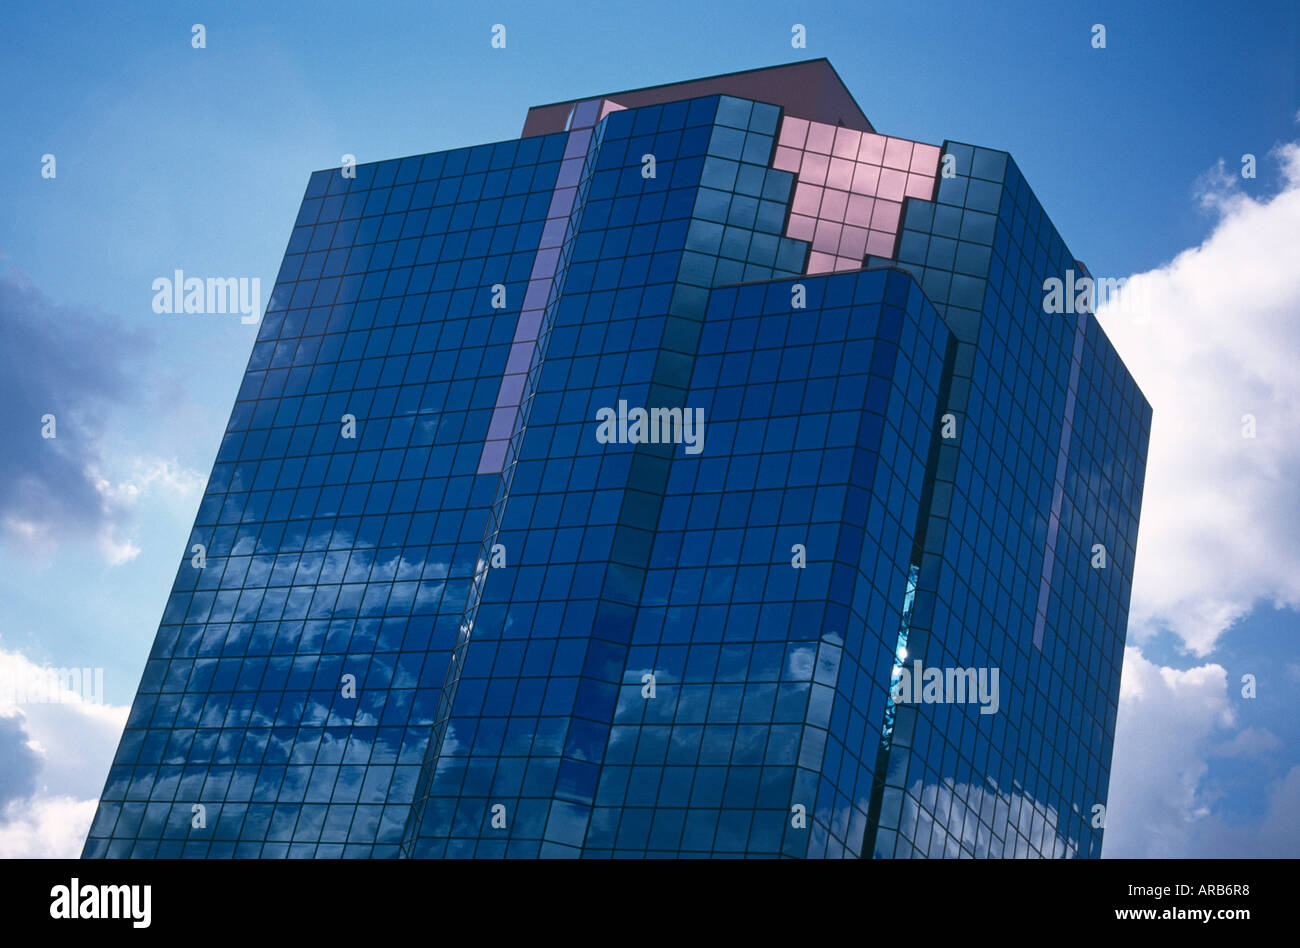 Skyscraper with cloud reflection Stock Photo